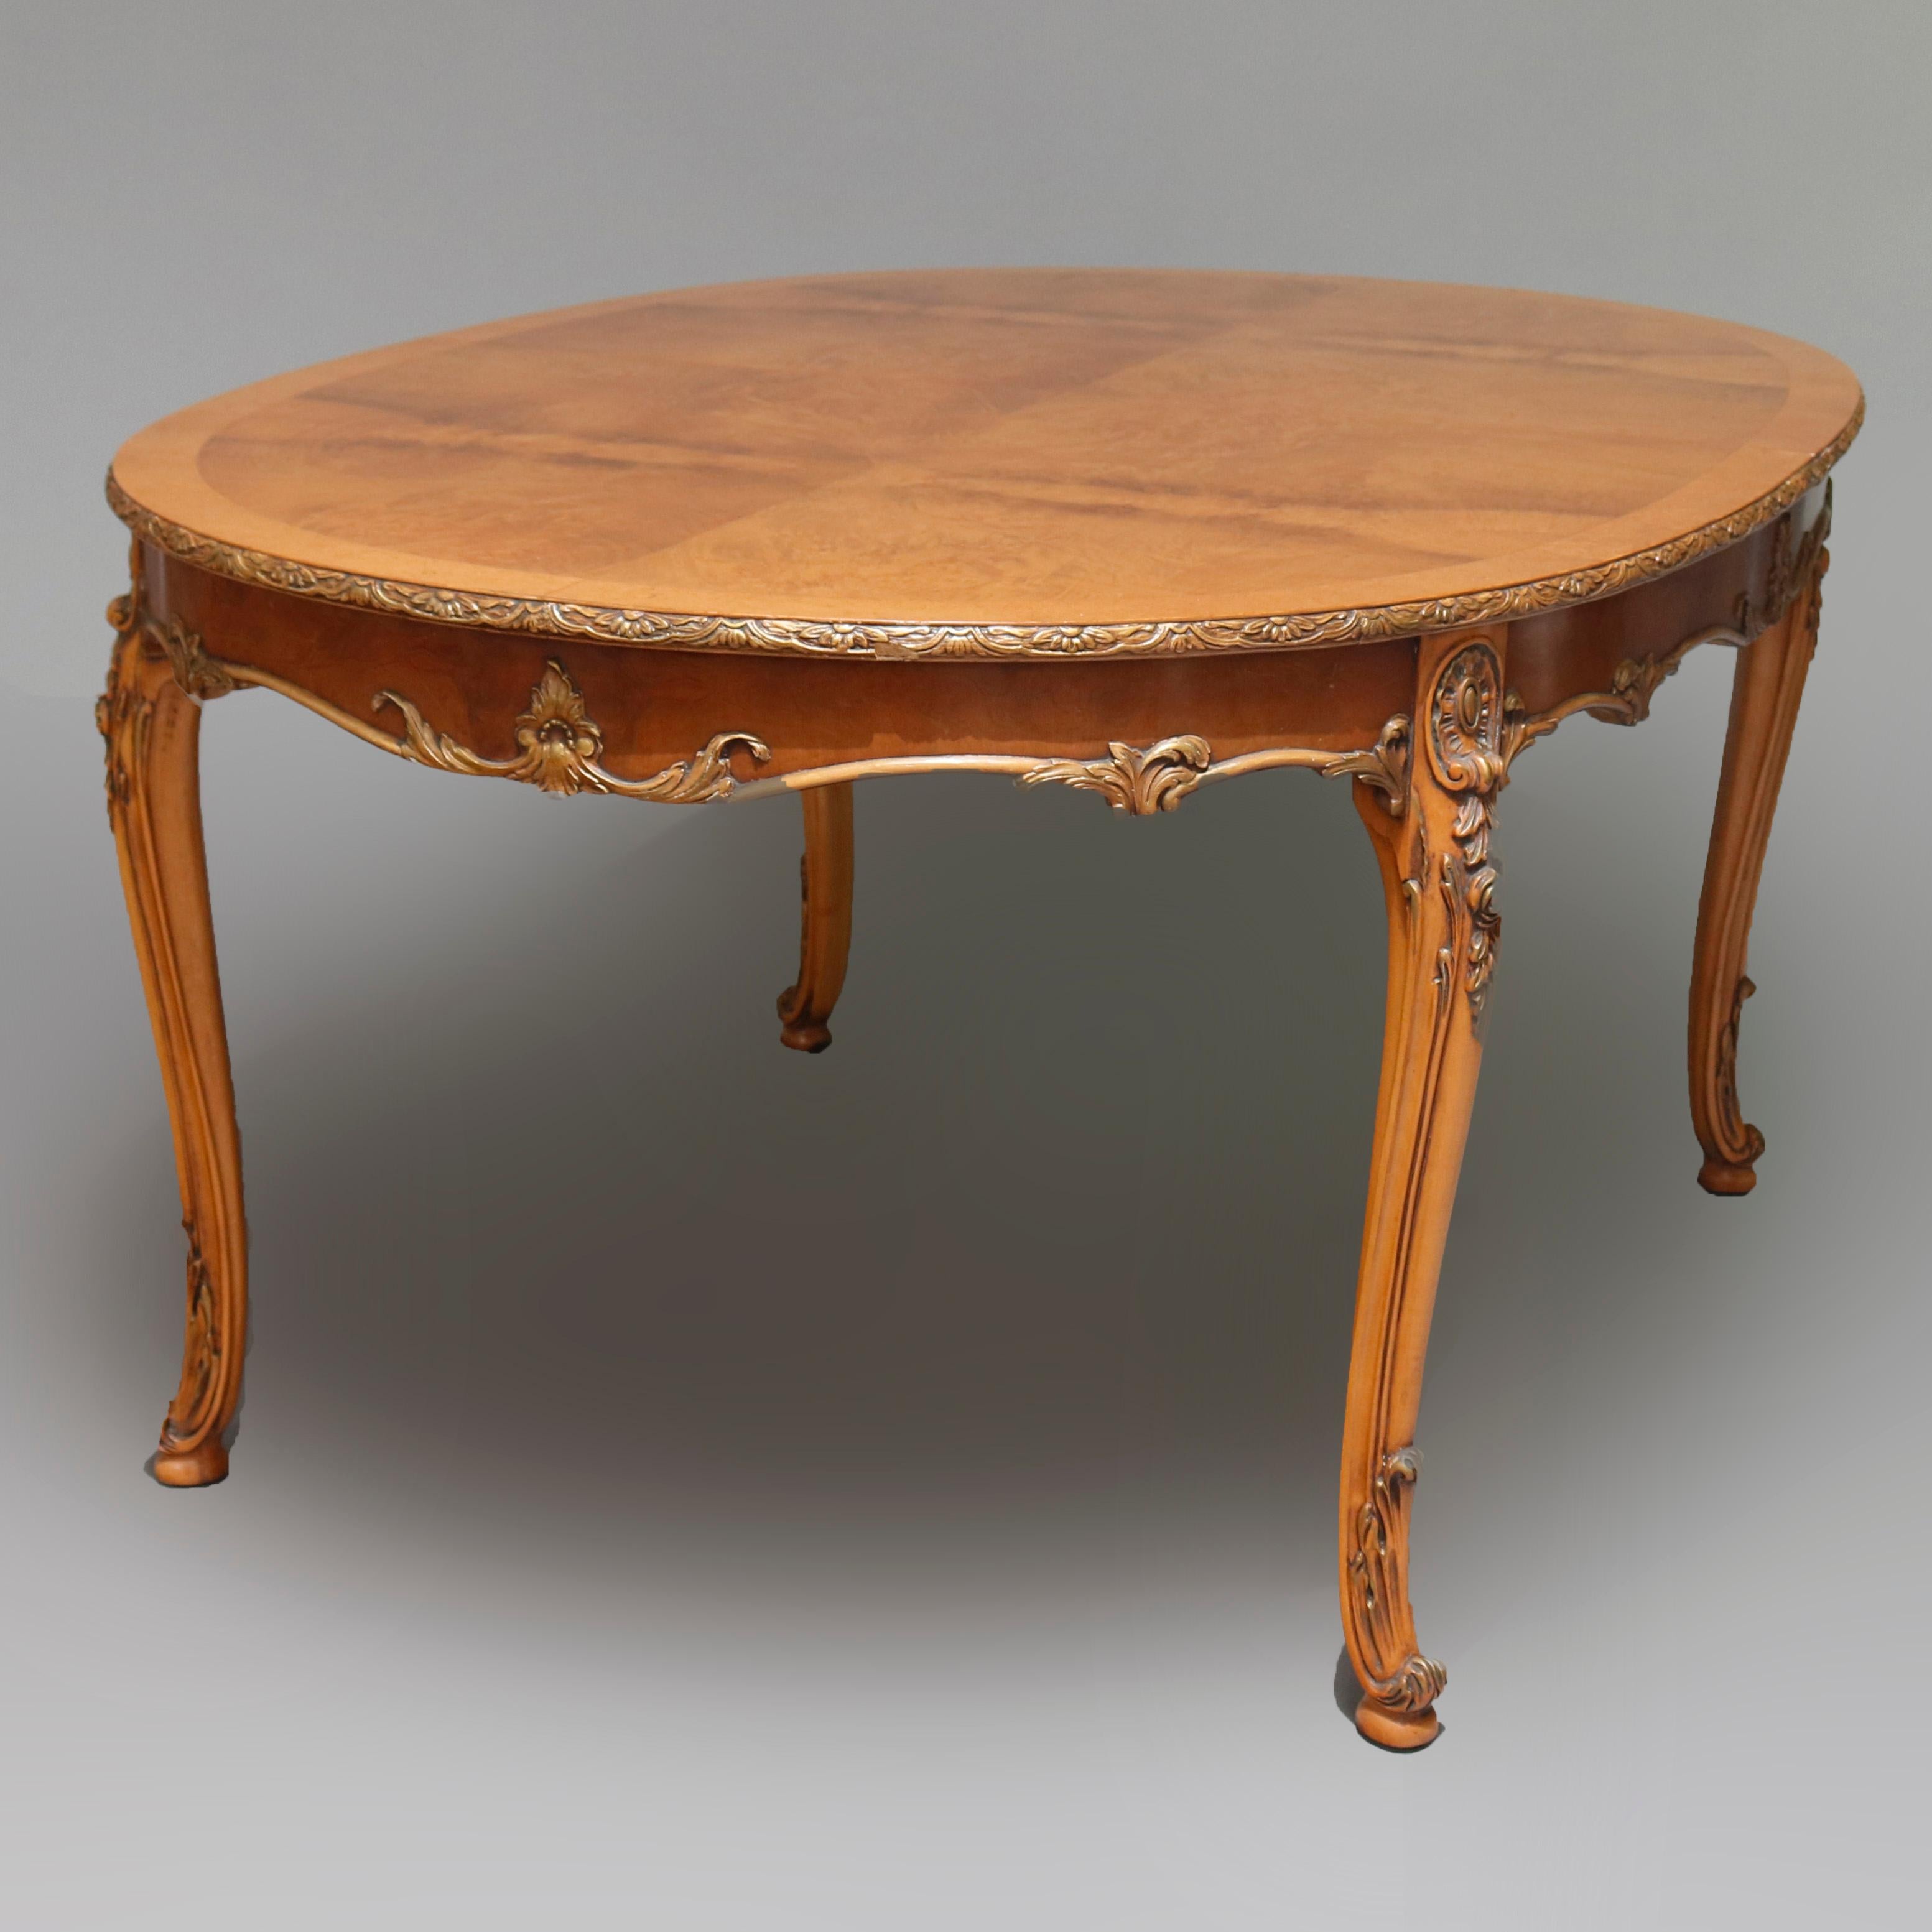 A vintage French Louis XV style dining set in Acacia by American Furniture Company offers carved maple parcel gilt table having two leaves with bookmatched bird's-eye maple top having carved and gilt foliate bordering and raised on carved foliate